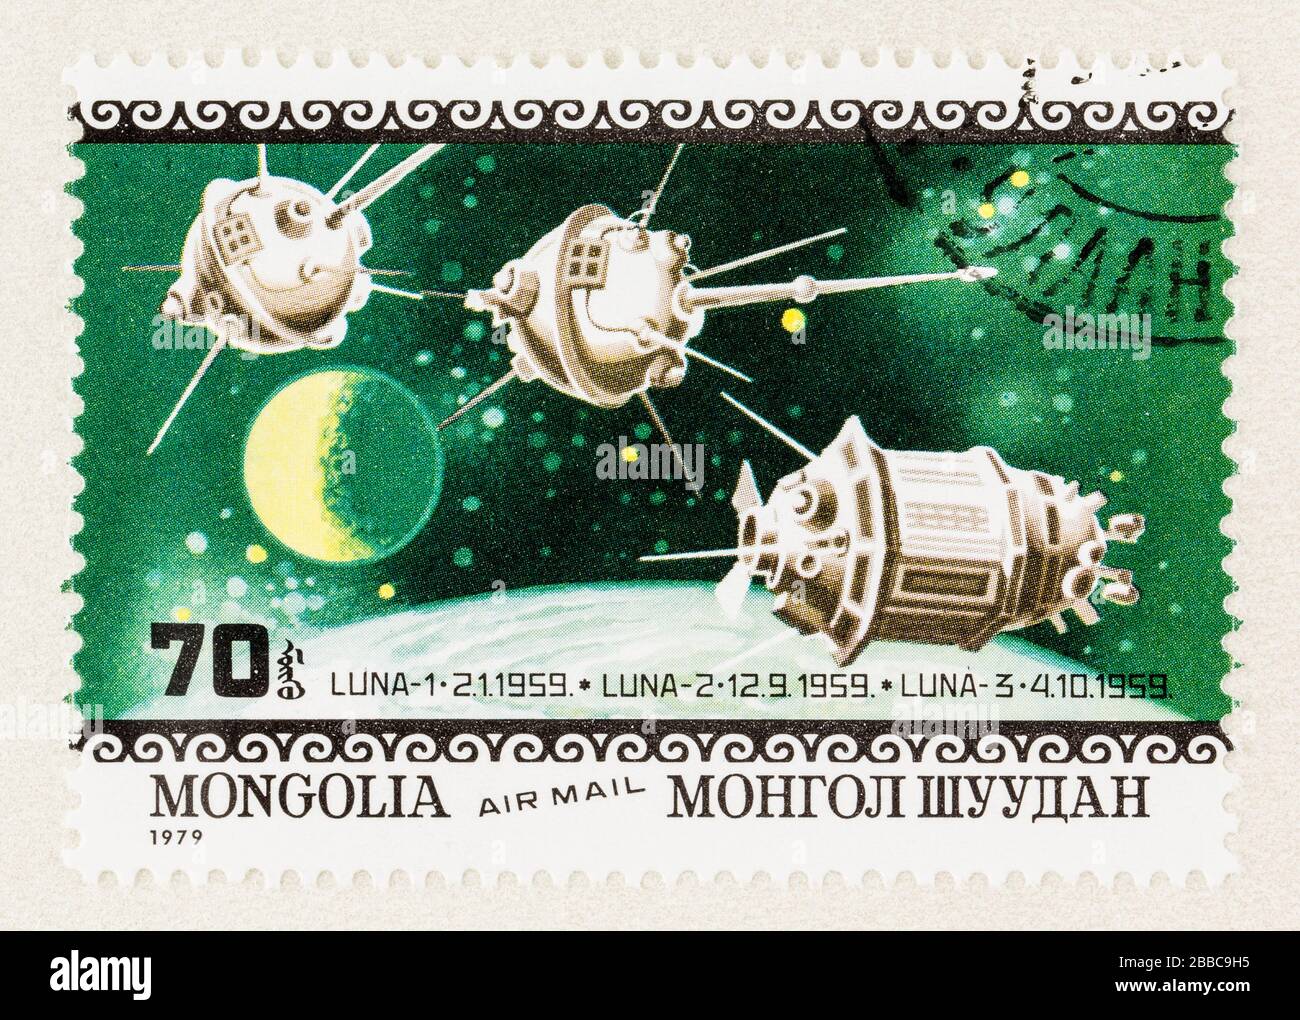 SEATTLE WASHINGTON - March 29, 2020: Close up of postage stamp from Mongolia commemorating the launch of lunar space probes Luna 1, 2 and 3 in 1959. Stock Photo